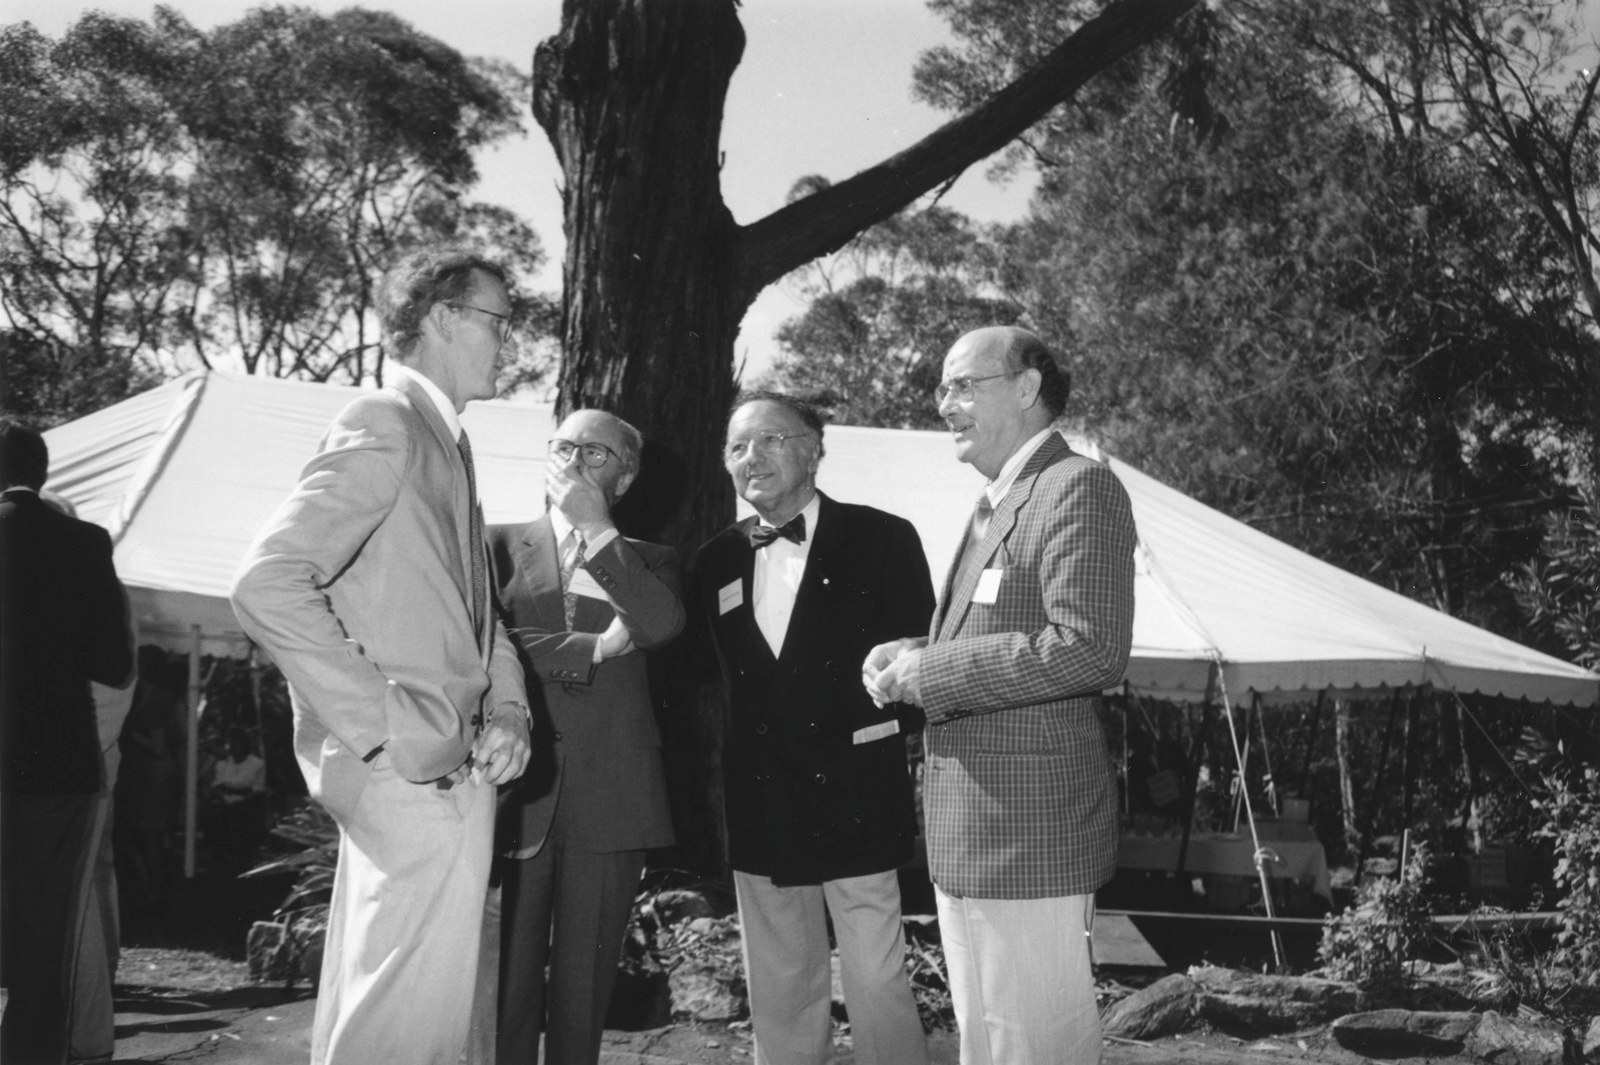 Black and white photograph of four men standing in front of tree in garden.